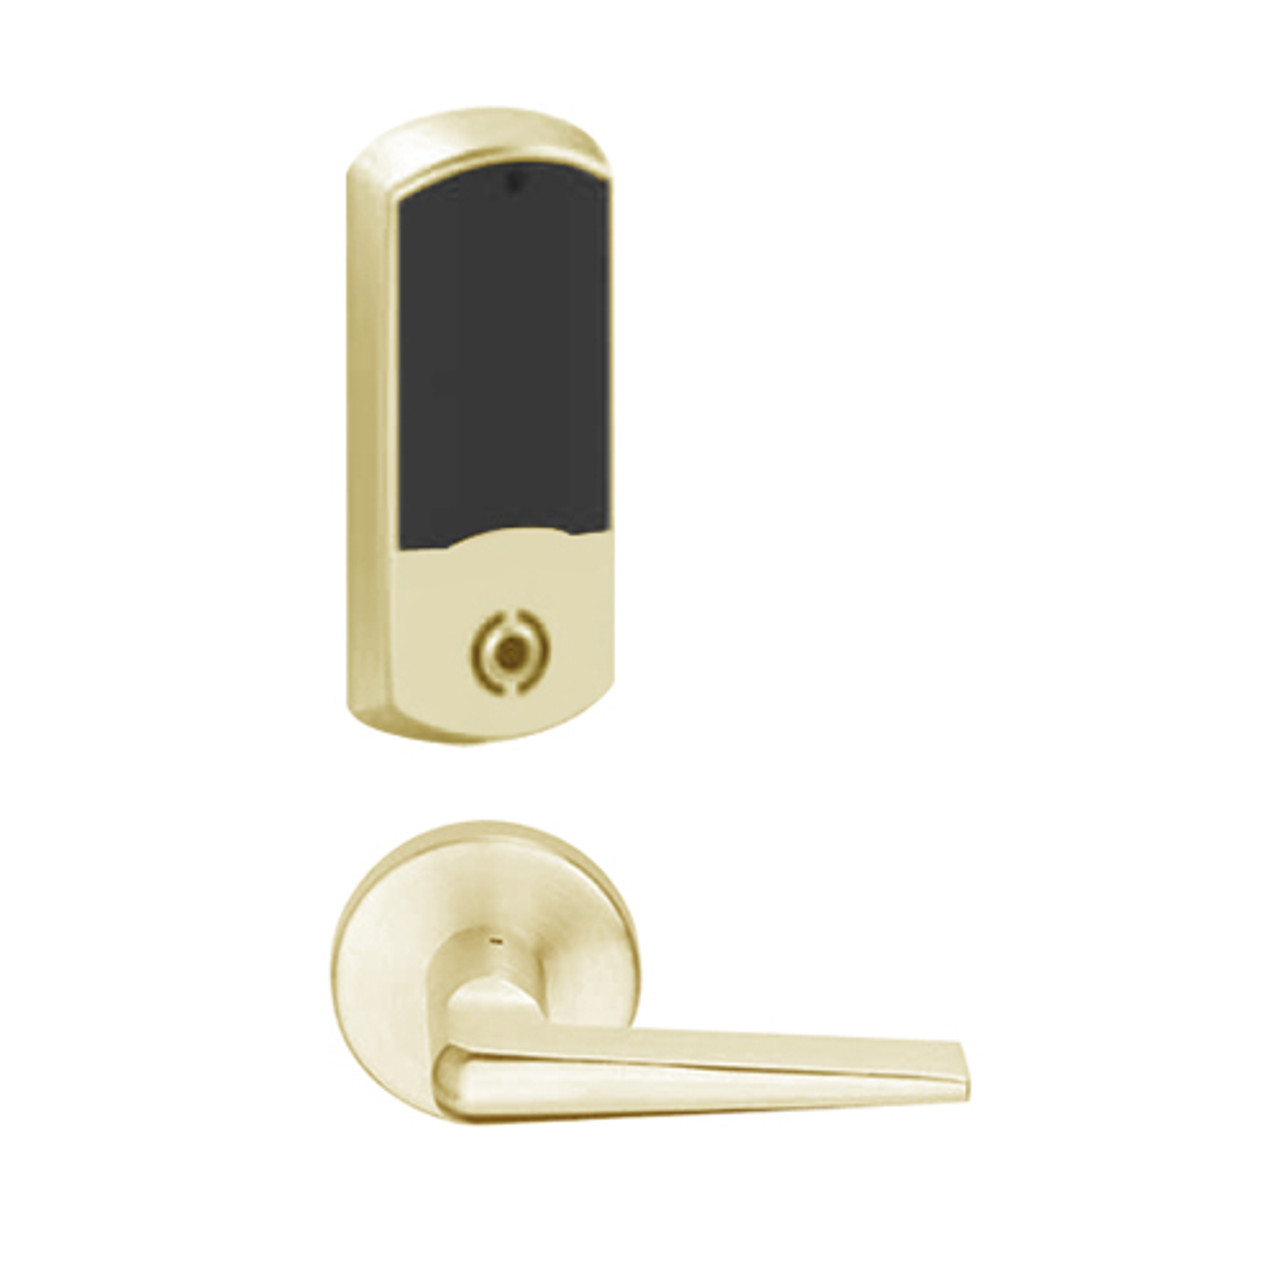 LEMS-GRW-L-05-606-00B Schlage Less Cylinder Storeroom Wireless Greenwich Mortise Lock with LED Indicator and 05 Lever in Satin Brass